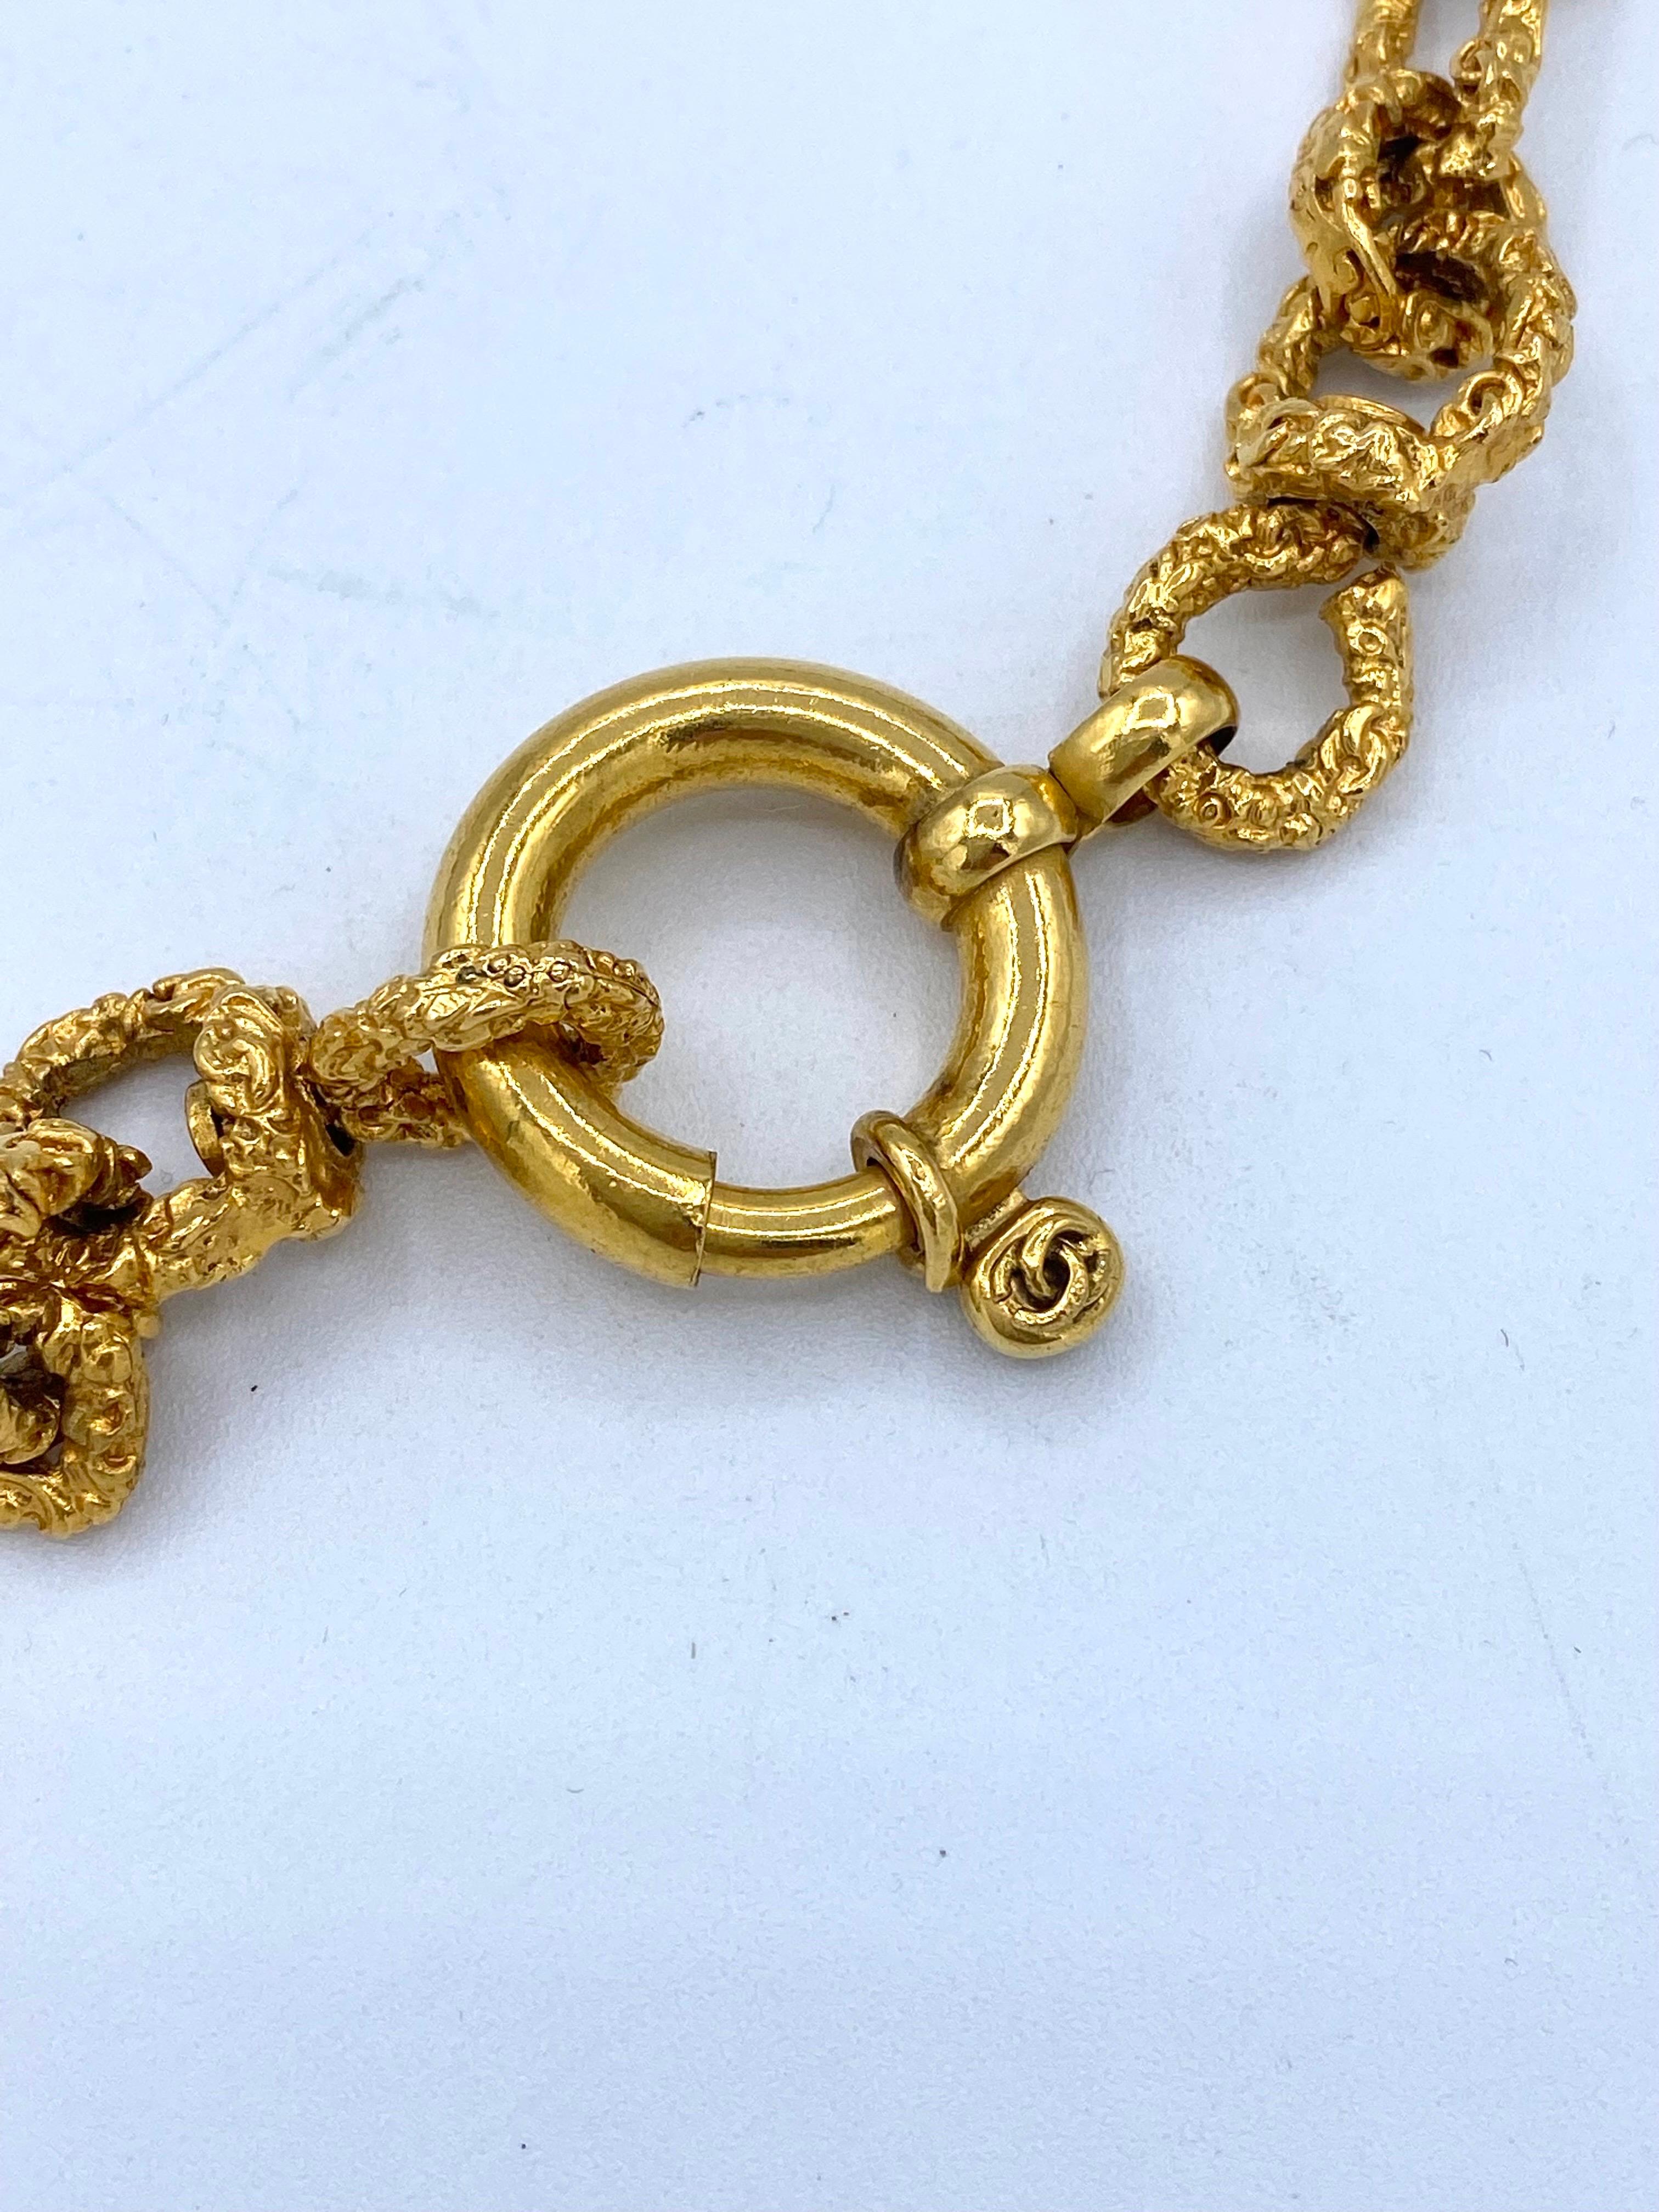 Vintage Chanel necklace from 1990 gold chain textured and intertwined CC pattern 1